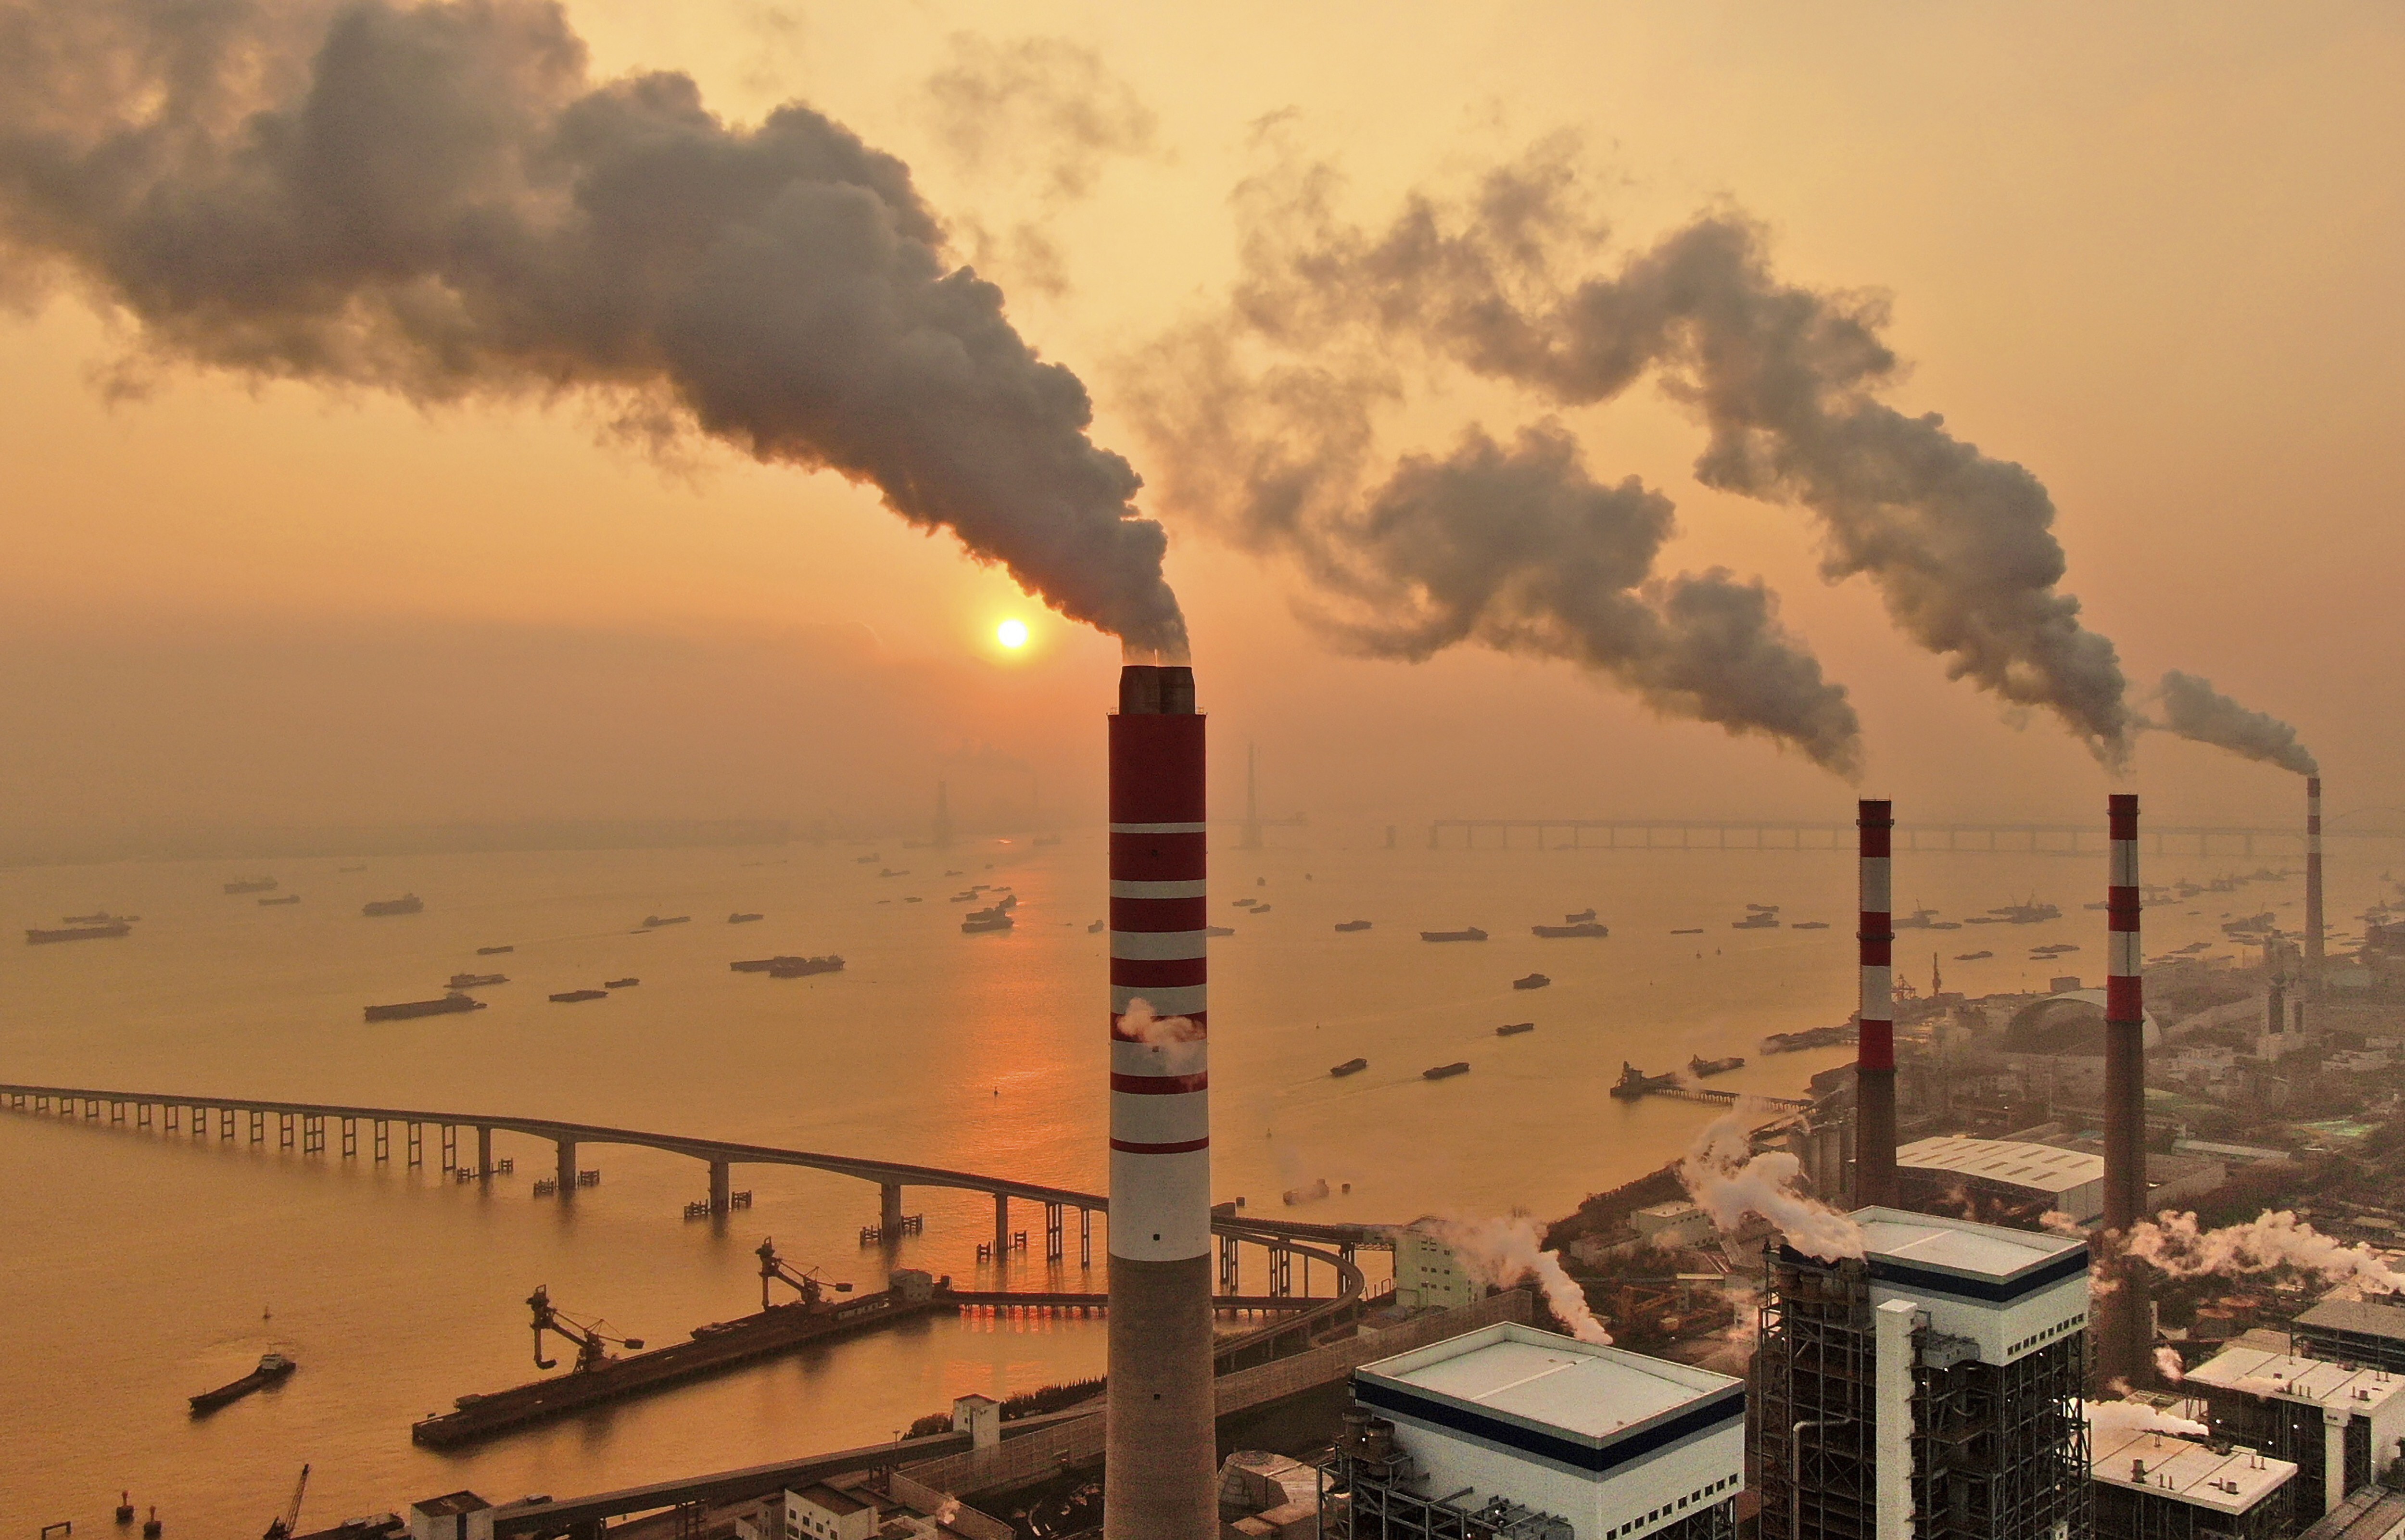 China remains in a twilight between aiming for carbon neutrality in 2060 but not yet giving up coal power. It is competing with the US for supremacy in the renewables technology race. Photo: AP